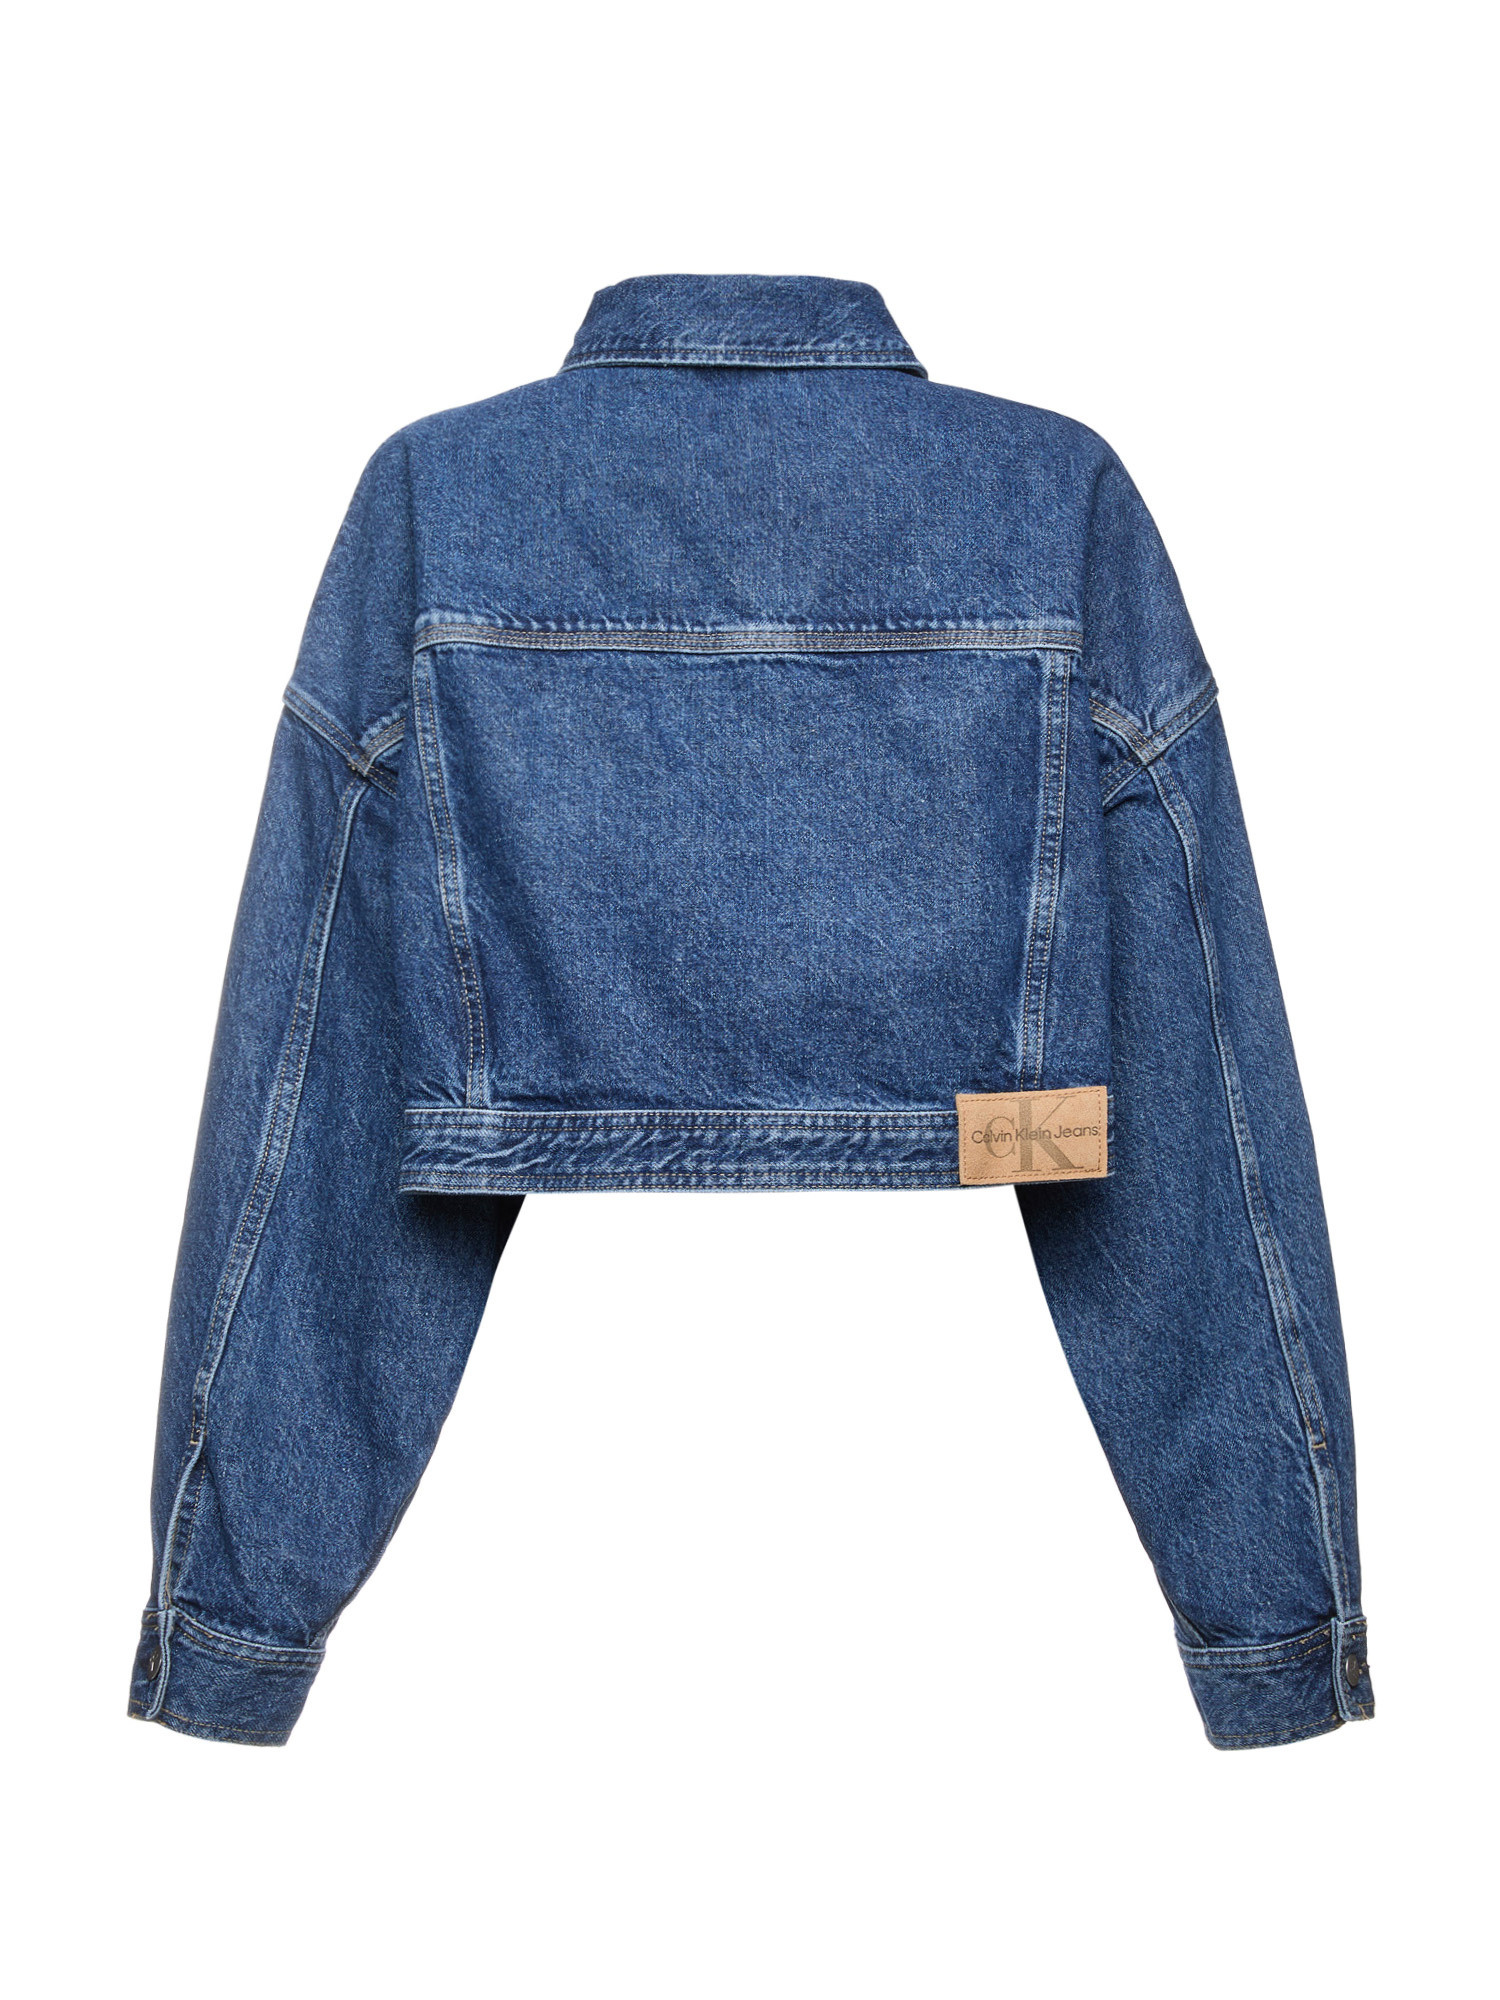 Calvin Klein Jeans - Cropped relaxed-fit jacket in denim, Denim, large image number 1